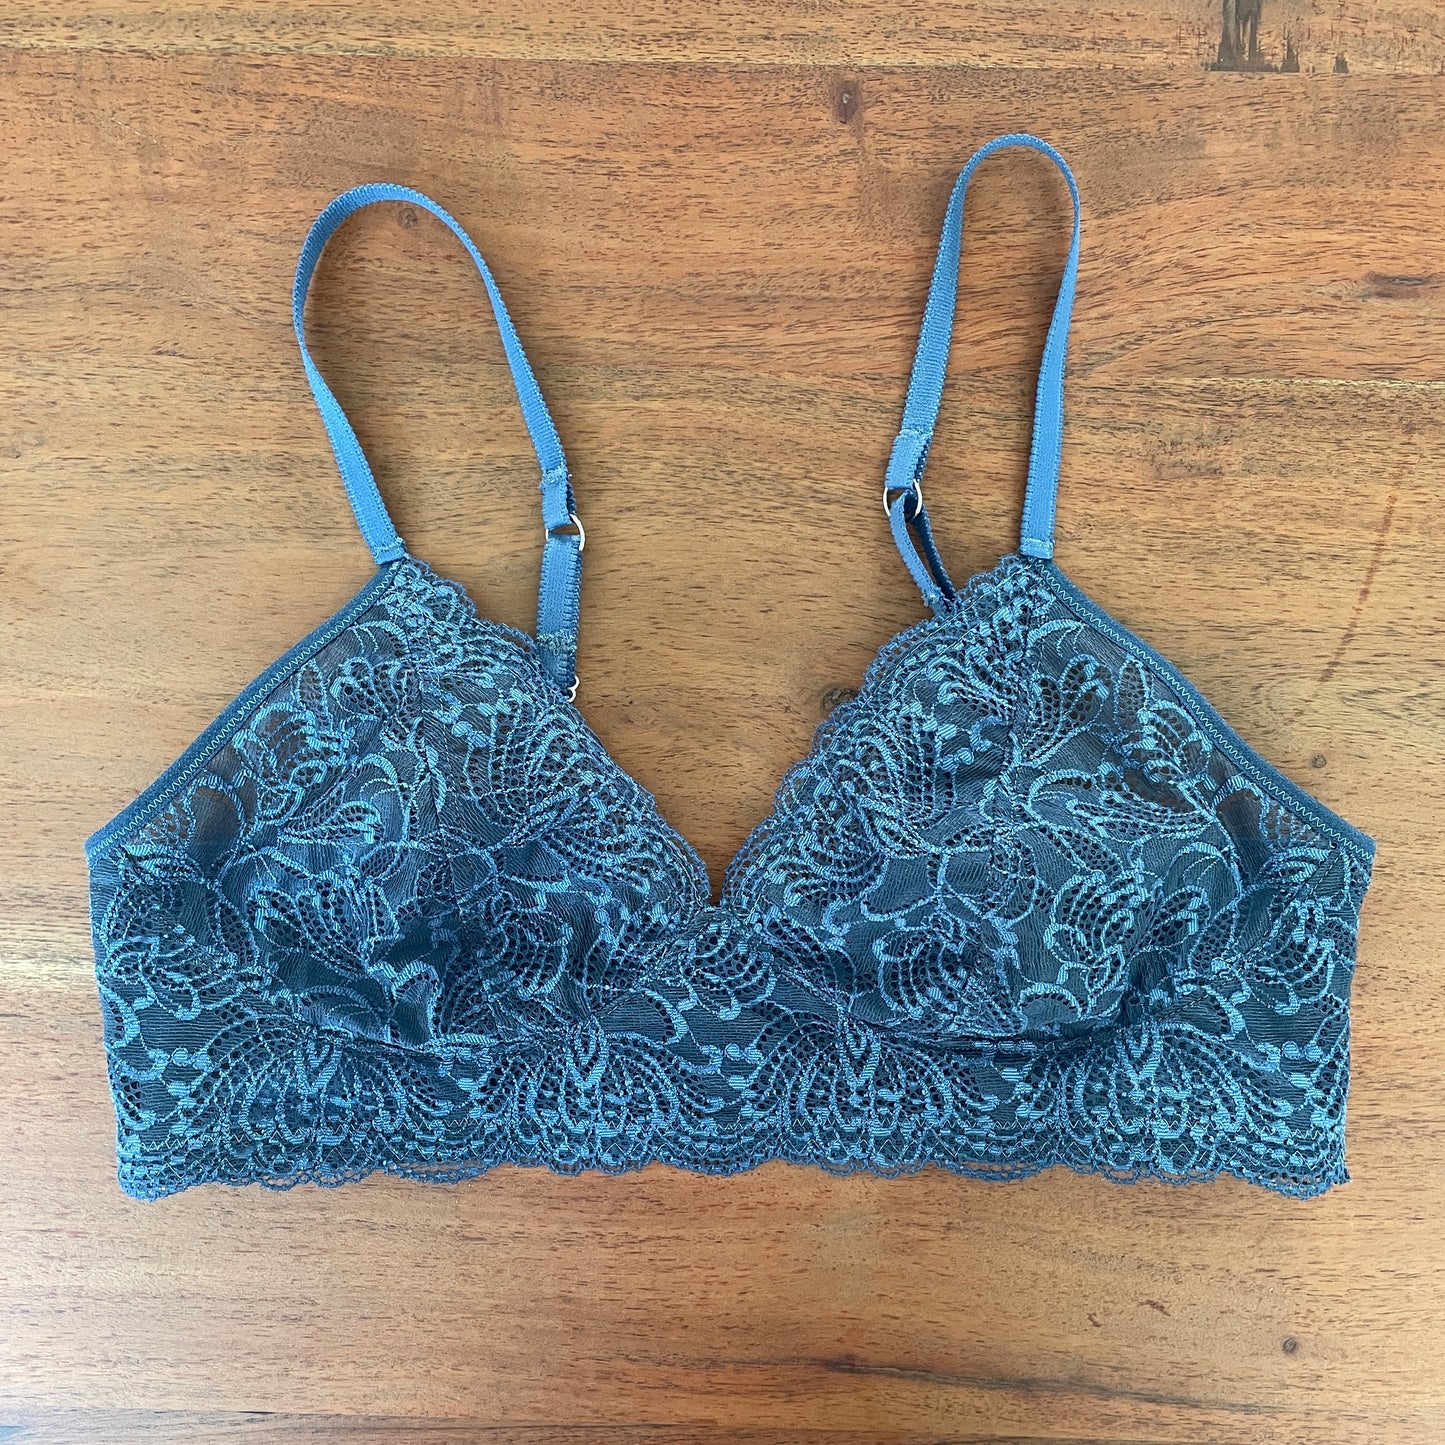 SAHAARA BRA sewing package with <tc>lace</tc>. View C: Full lace. Petrol